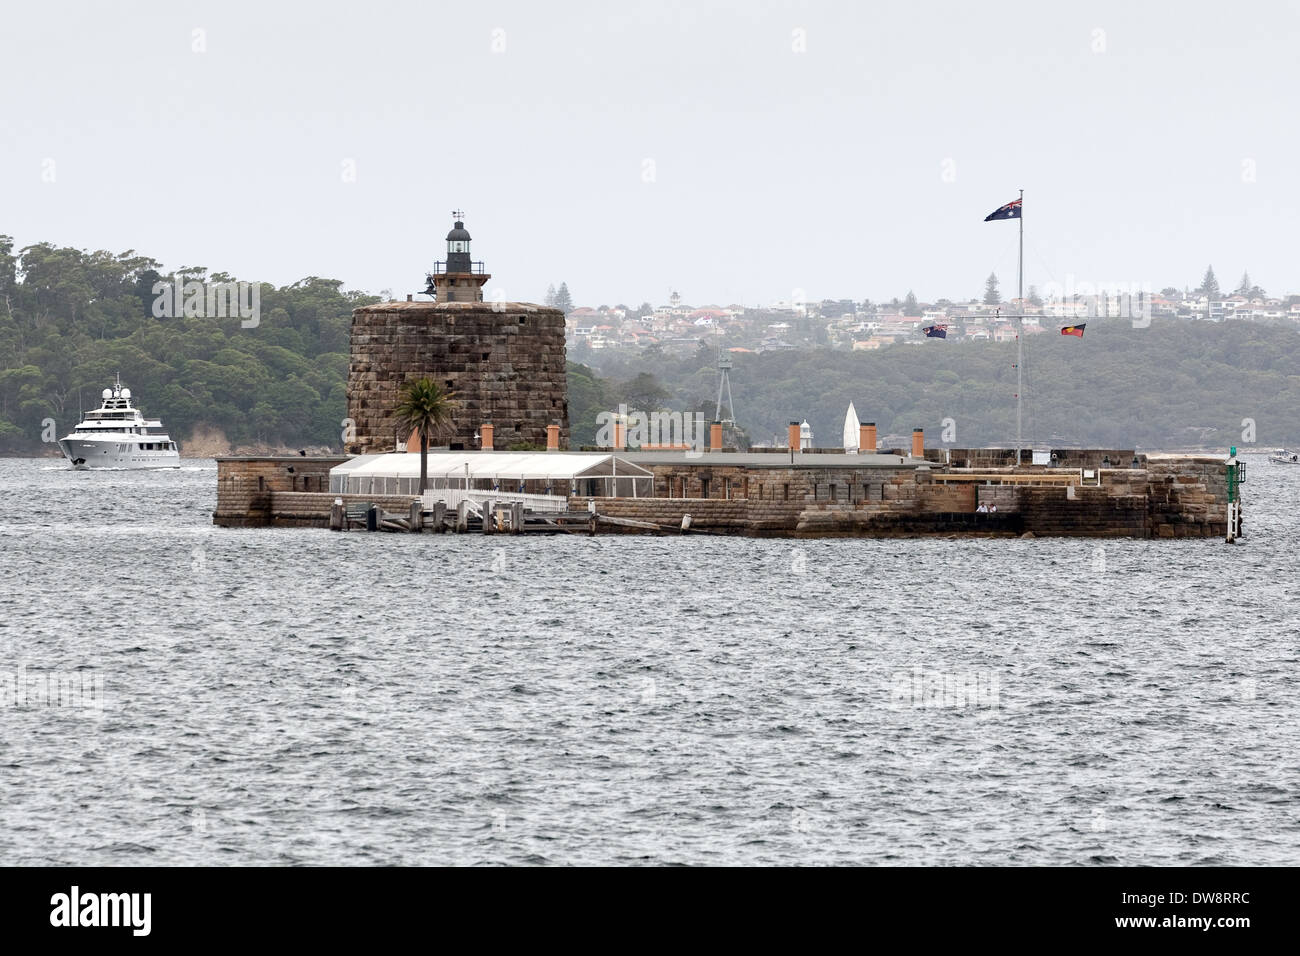 Fort Denison, Pinchgut island, former penal site and defensive facility, Sydney Habour, Australia Stock Photo